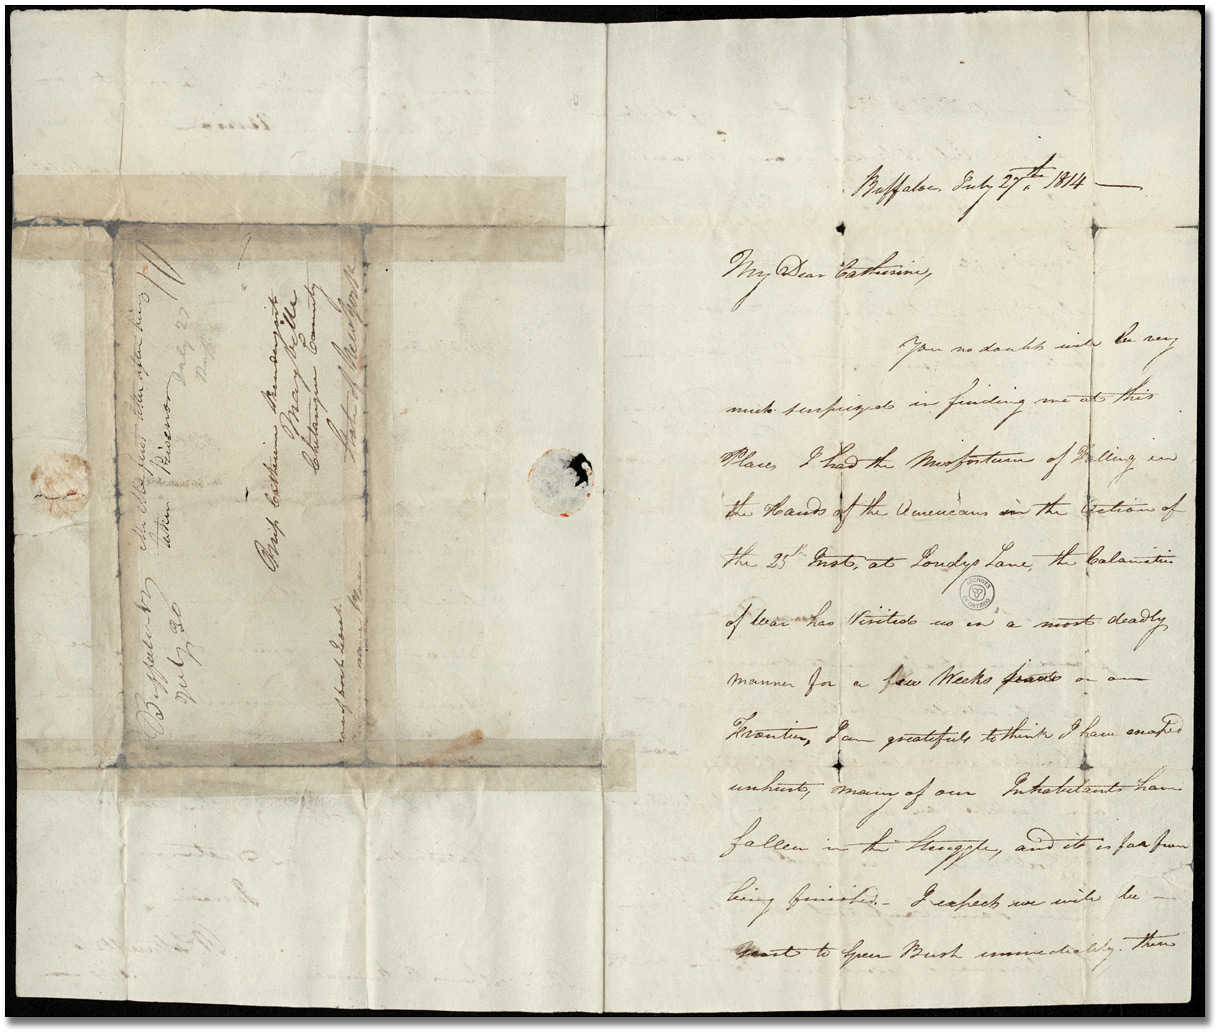 Letter from William Merritt (Buffalo) to Catherine Prendergast, July 27, 1814 (Pages 1 and 4)